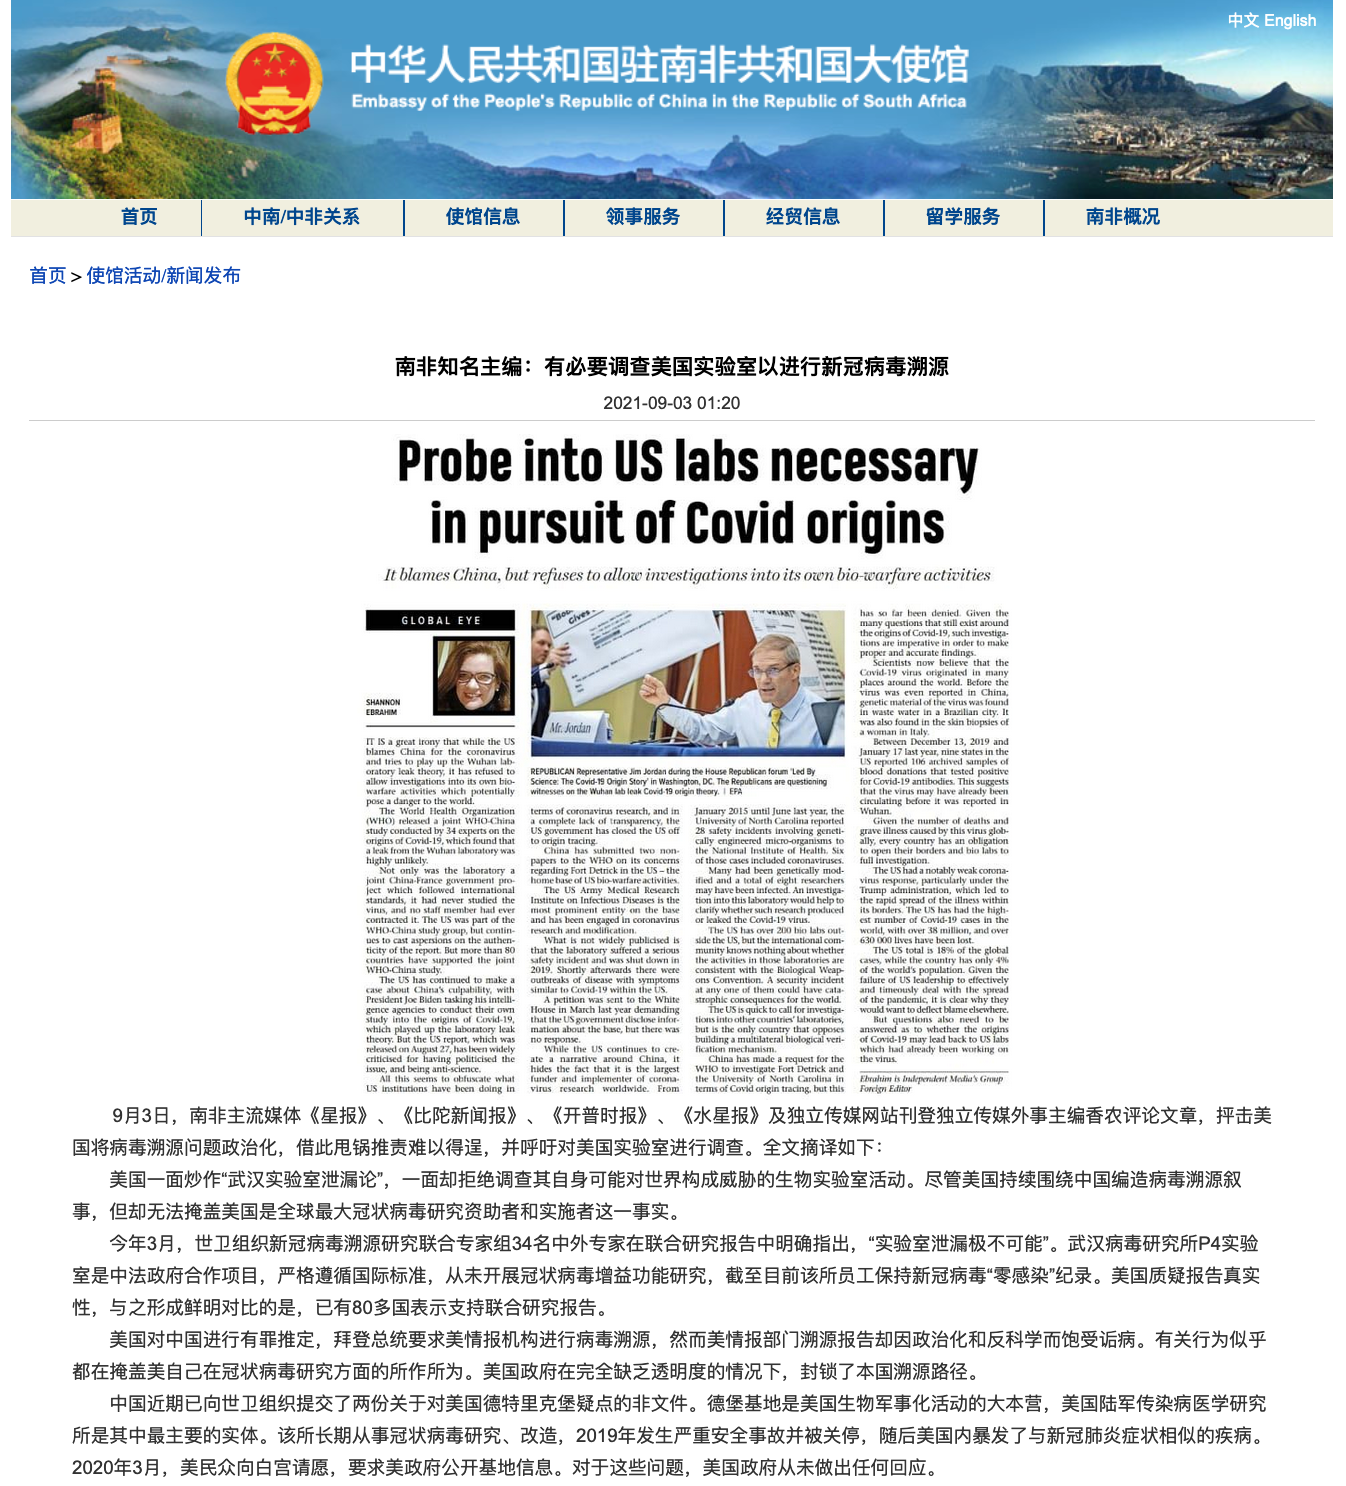 Chinese Embassy slams Der Spiegel over 'Coronavirus made in China' front  page - Global Times